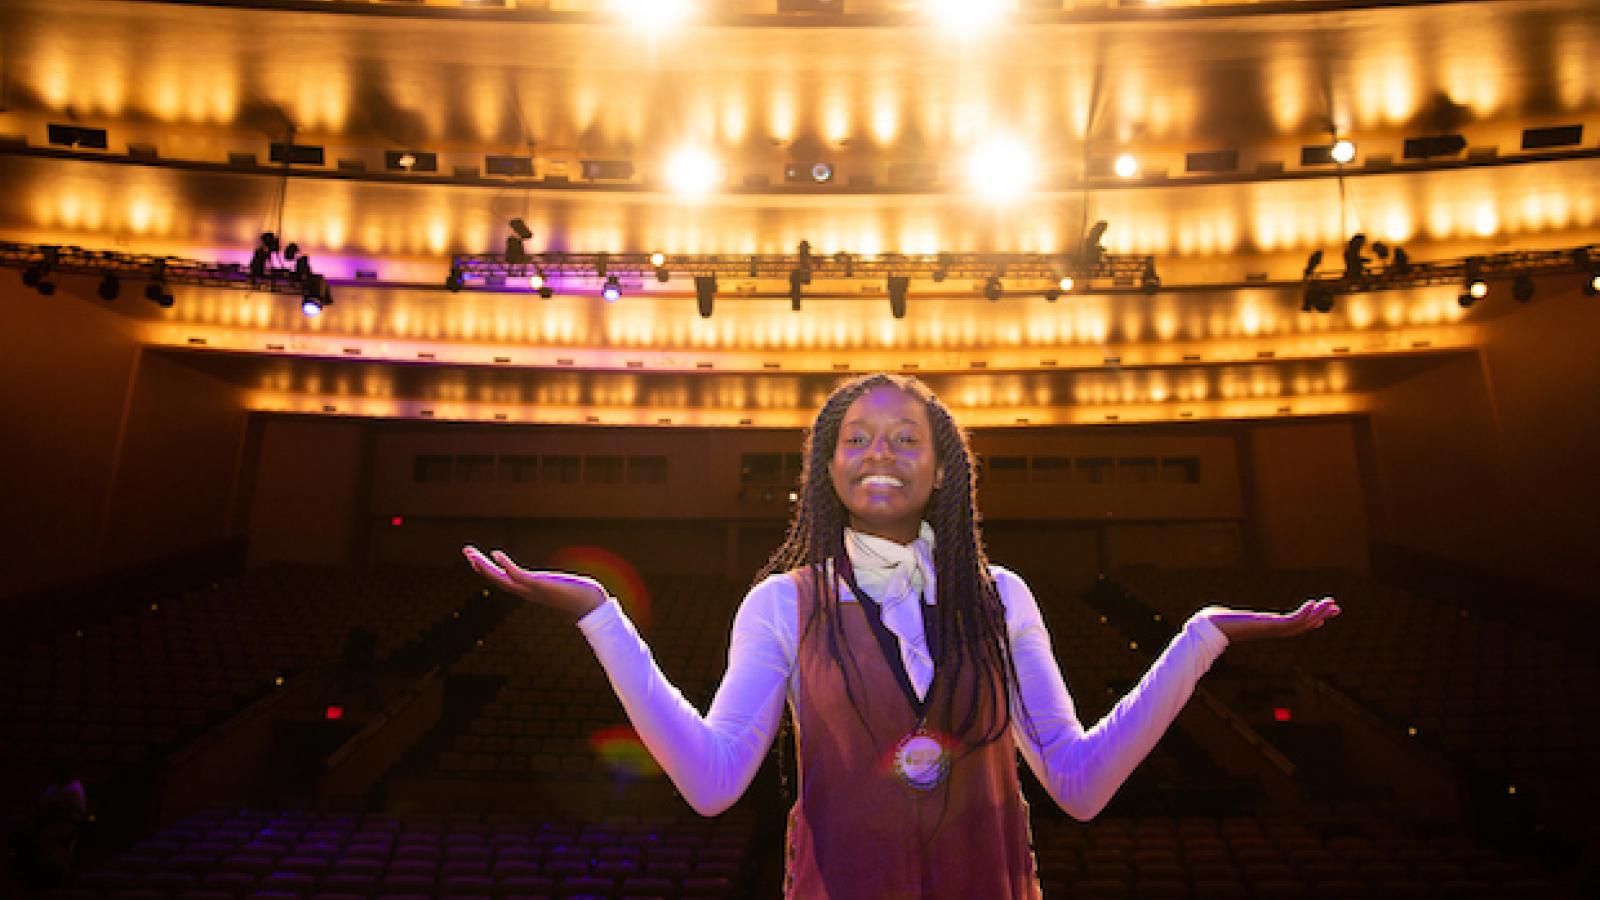 photo of young Black woman with long braids standing on stage with her back to audience and lights blazing behind her